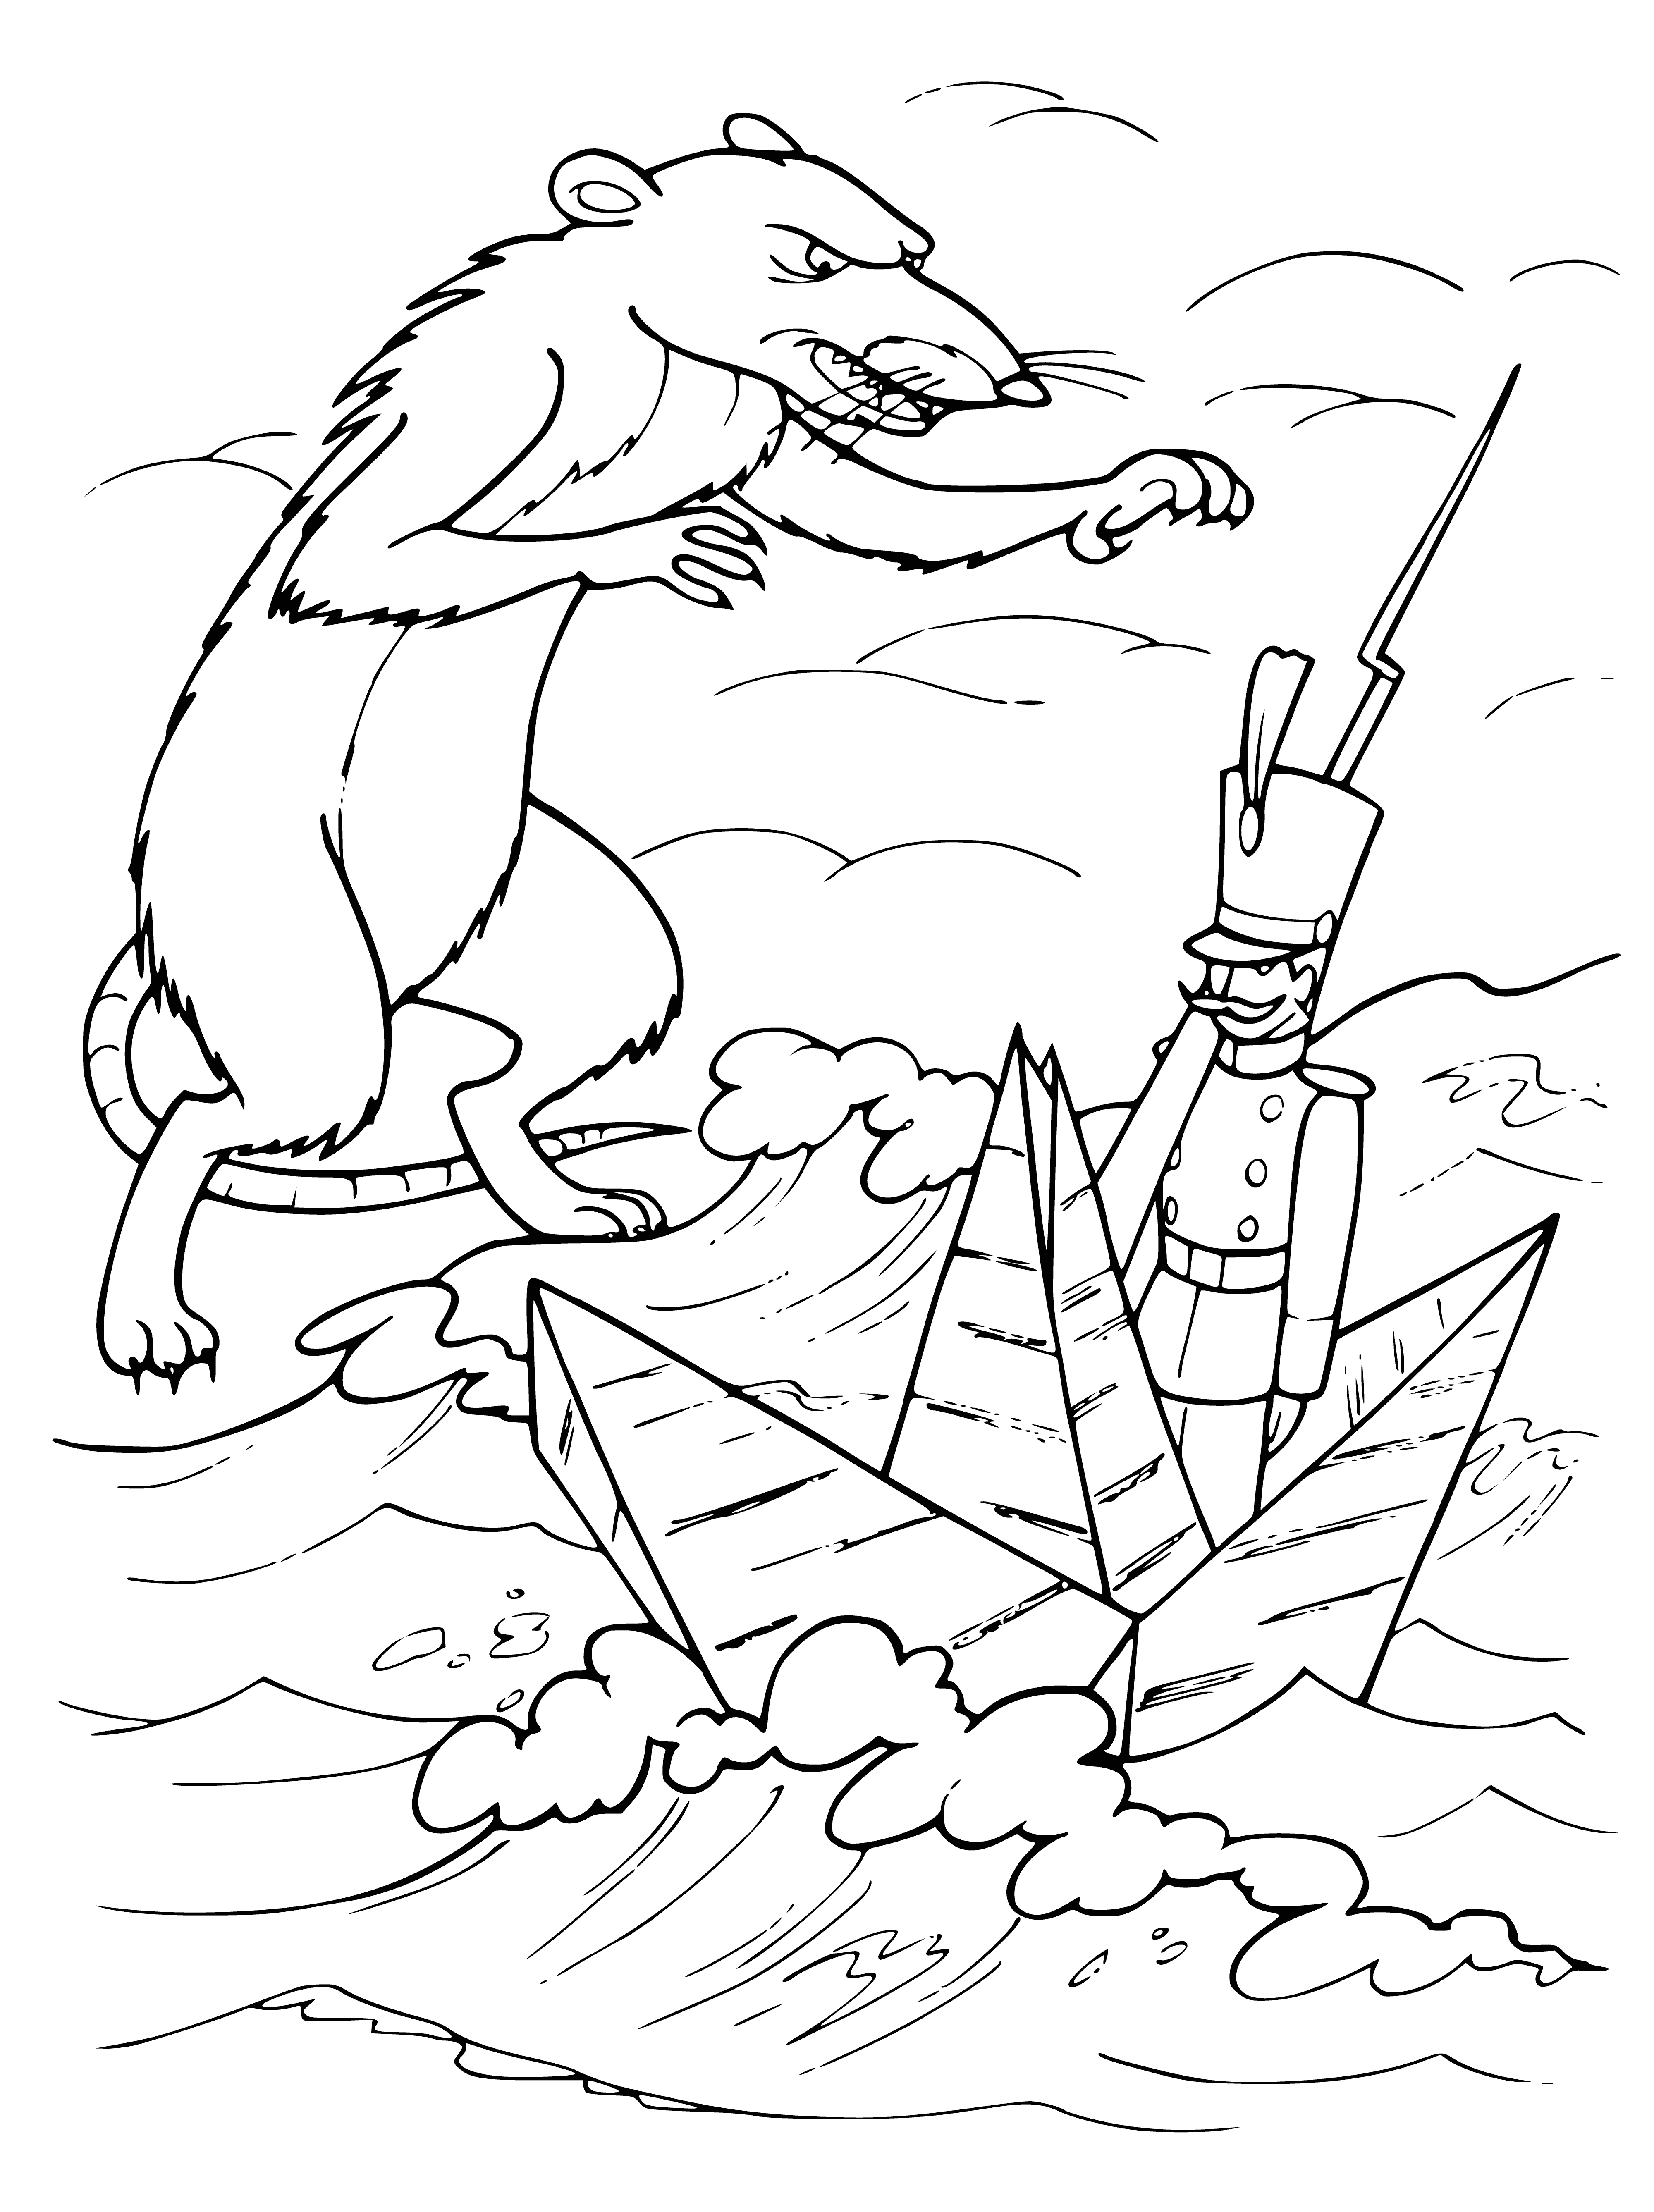 A soldier on a boat coloring page